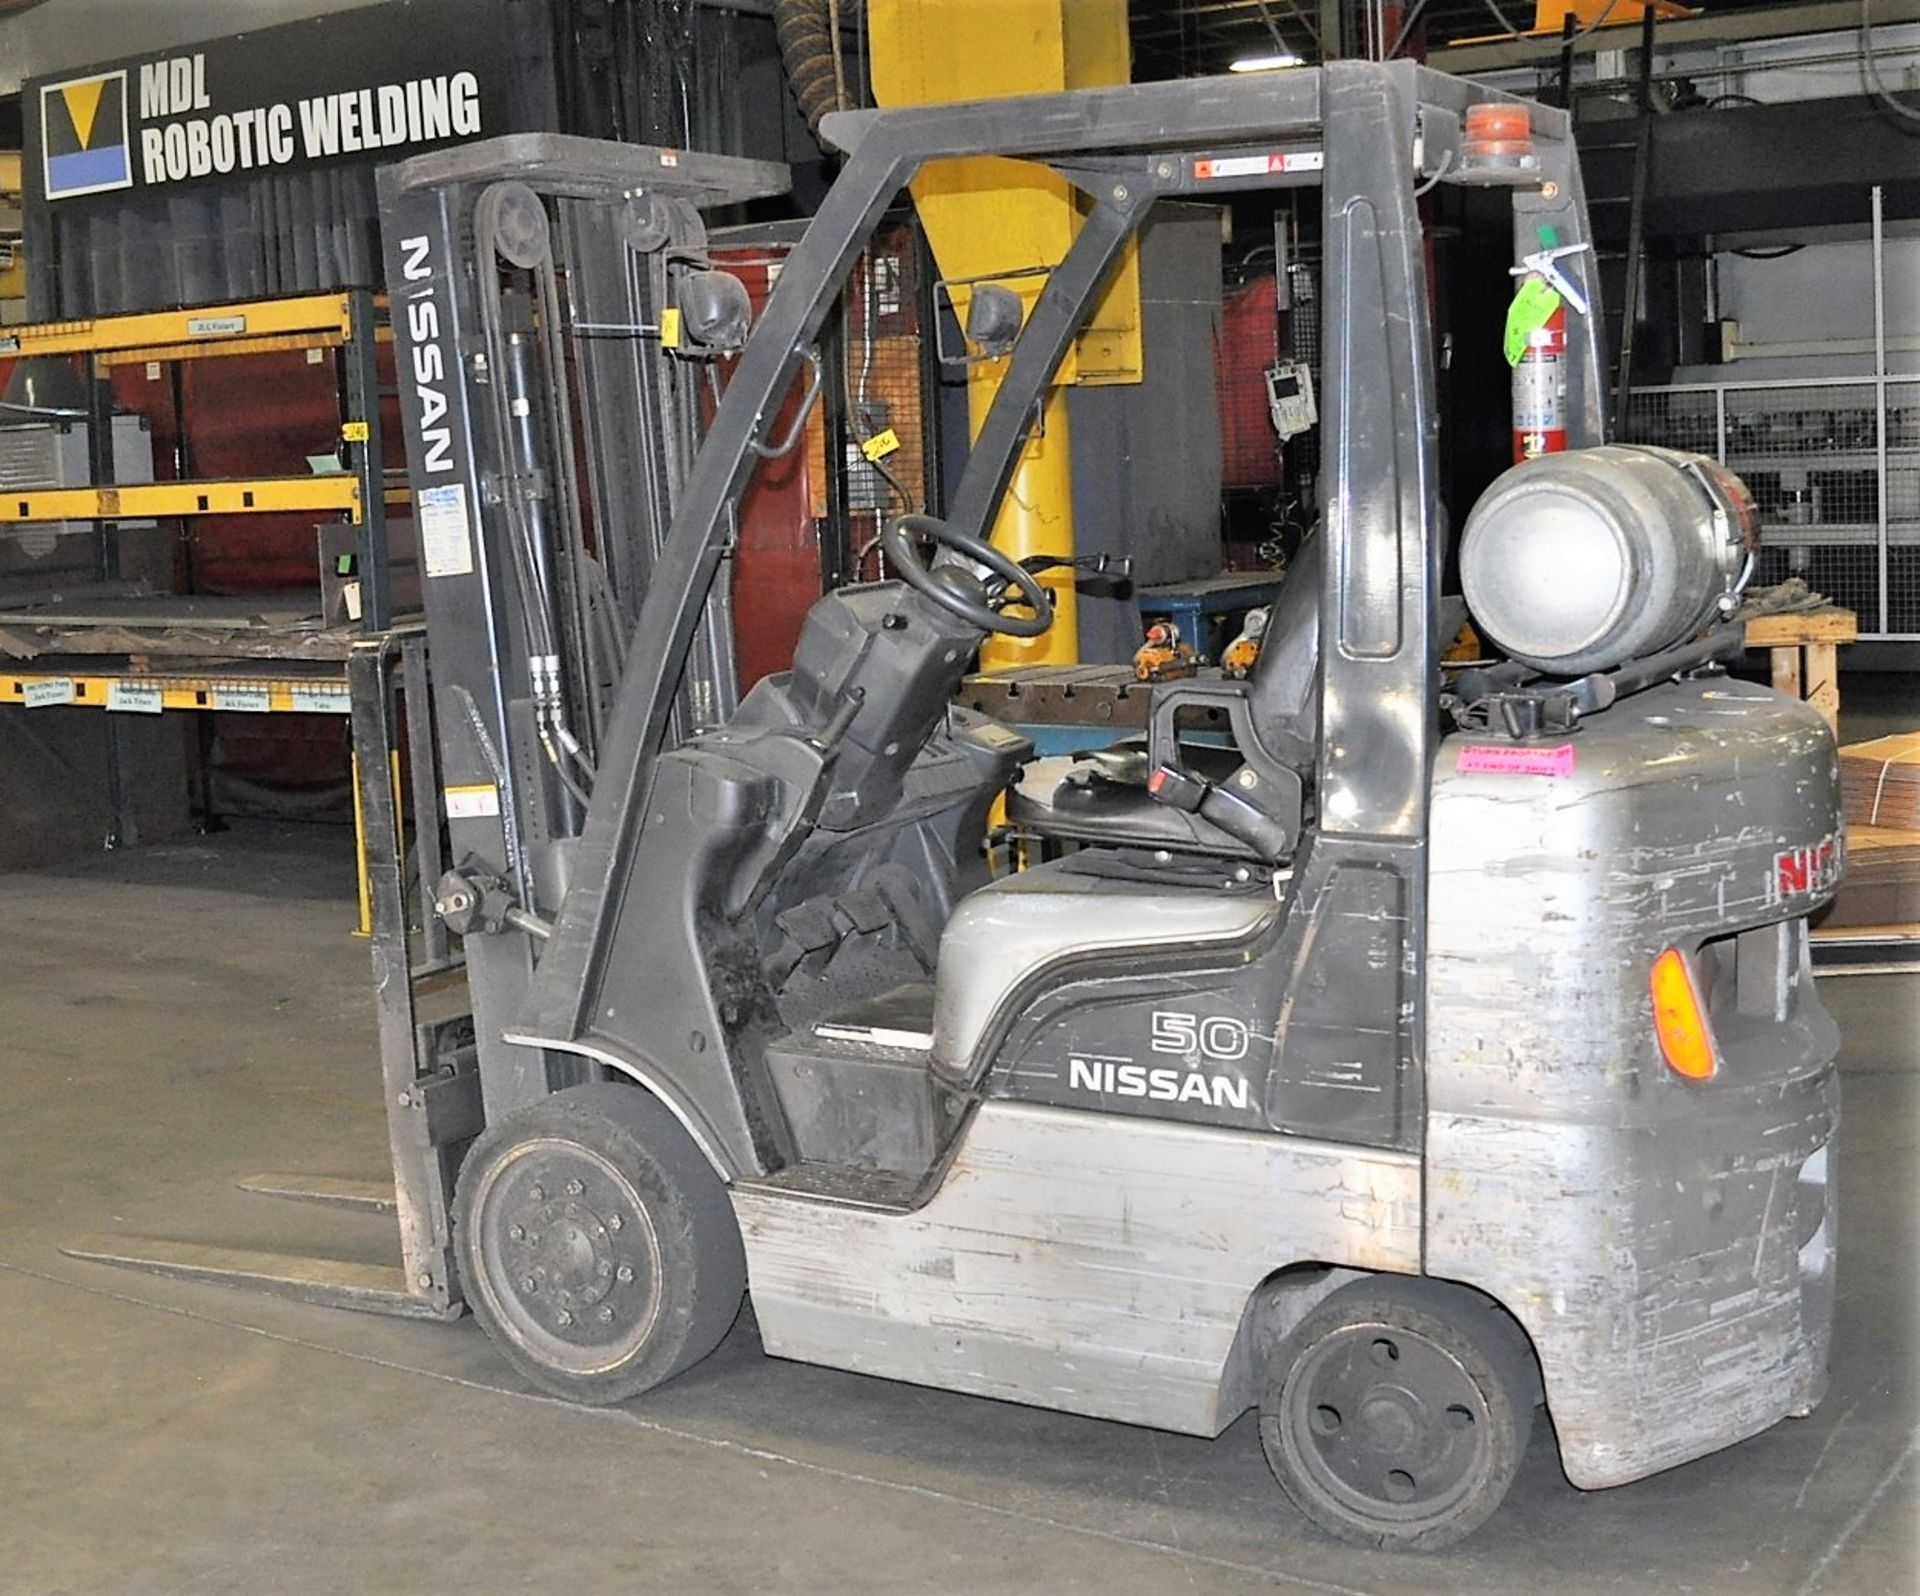 NISSAN MDL. MCPL02A25LV 3150# CAPACITY PROPANE FORKLIFT TRUCK, WITH 187" LIFT, SOLID TIRES, SIDE - Image 2 of 5